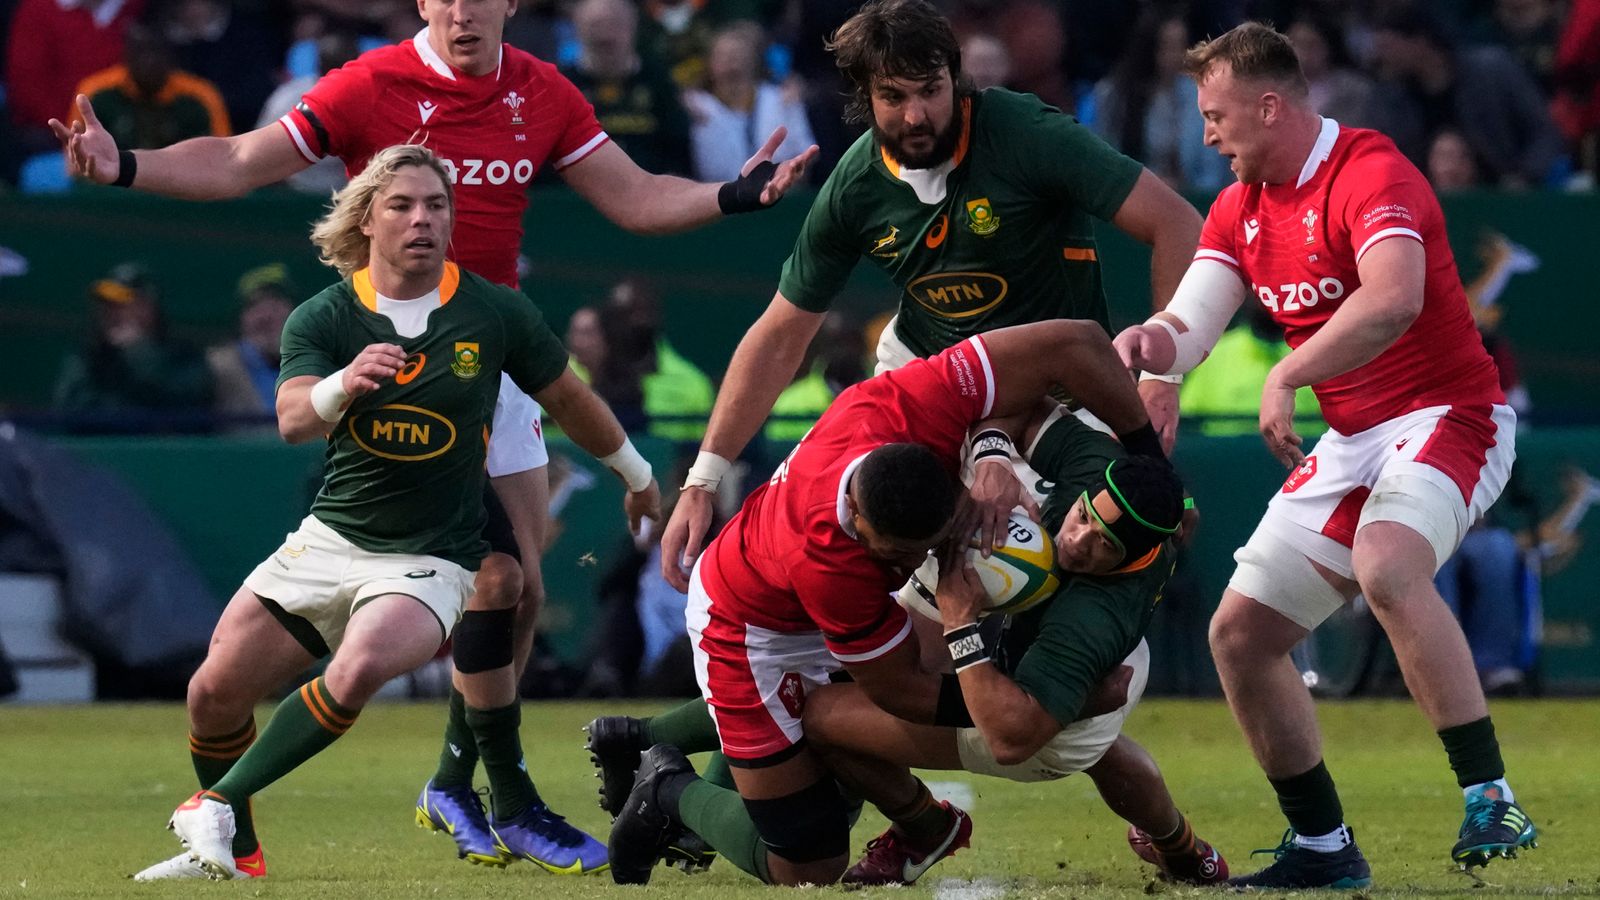 South Africa 32-29 Wales Springboks take dramatic 1-0 series lead with late penalty Rugby Union News Sky Sports